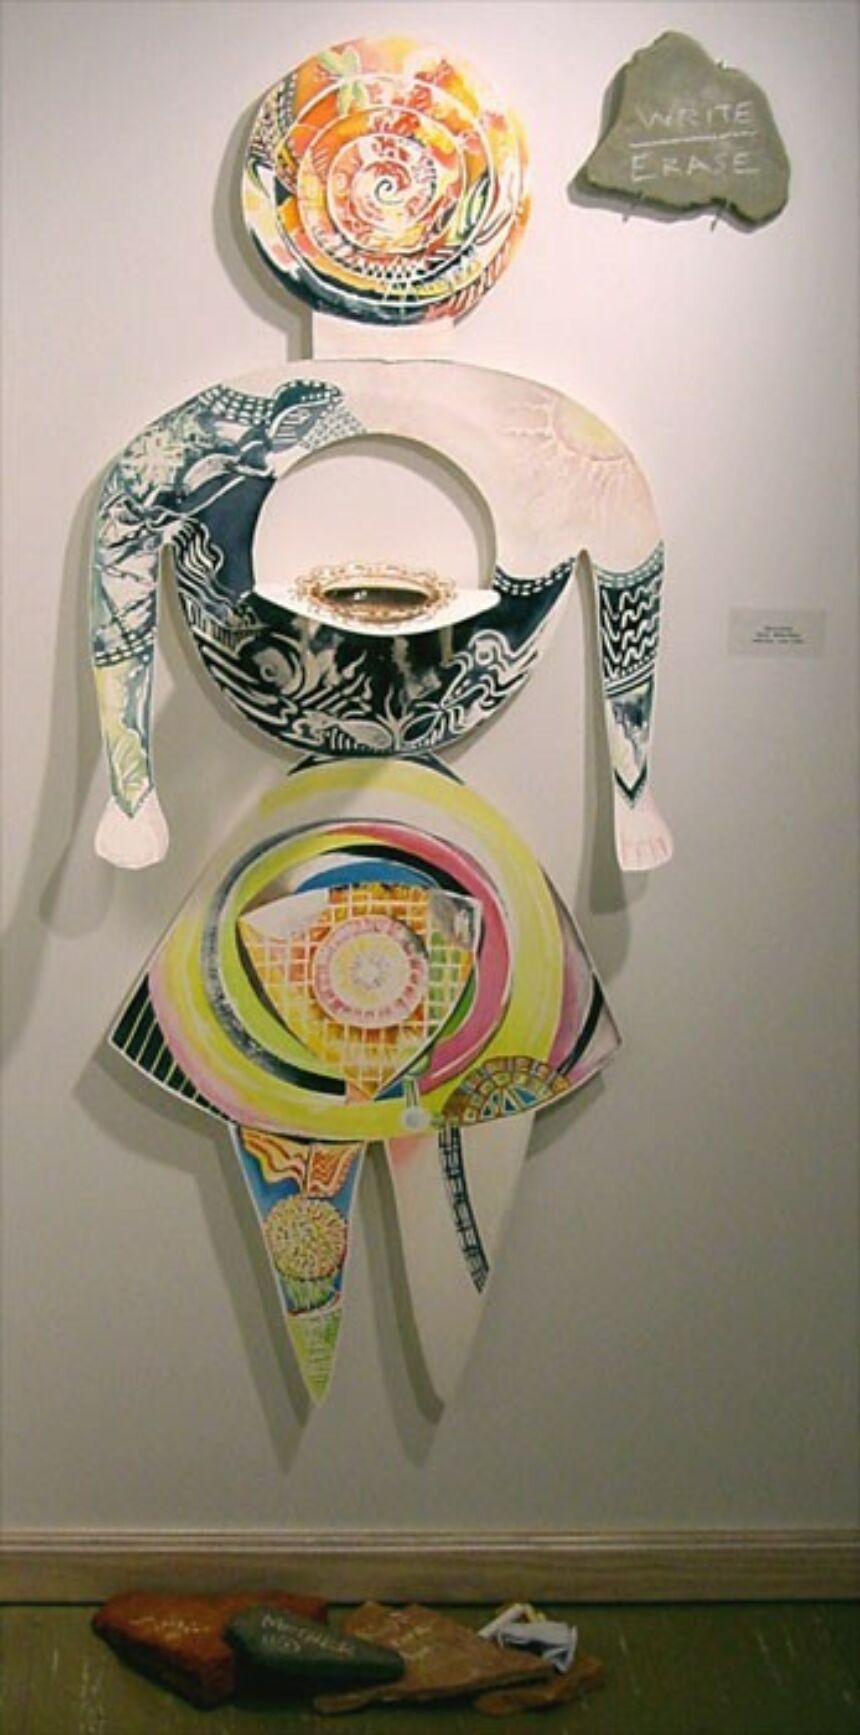 Wall installation of a vibrant watercolor piece, cut into an outline of a woman. A bowl sits on a flap cut out from the chest area. The title of the piece, "Write, Erase" is written on a flat stone affixed to the wall adjacent to the installation.